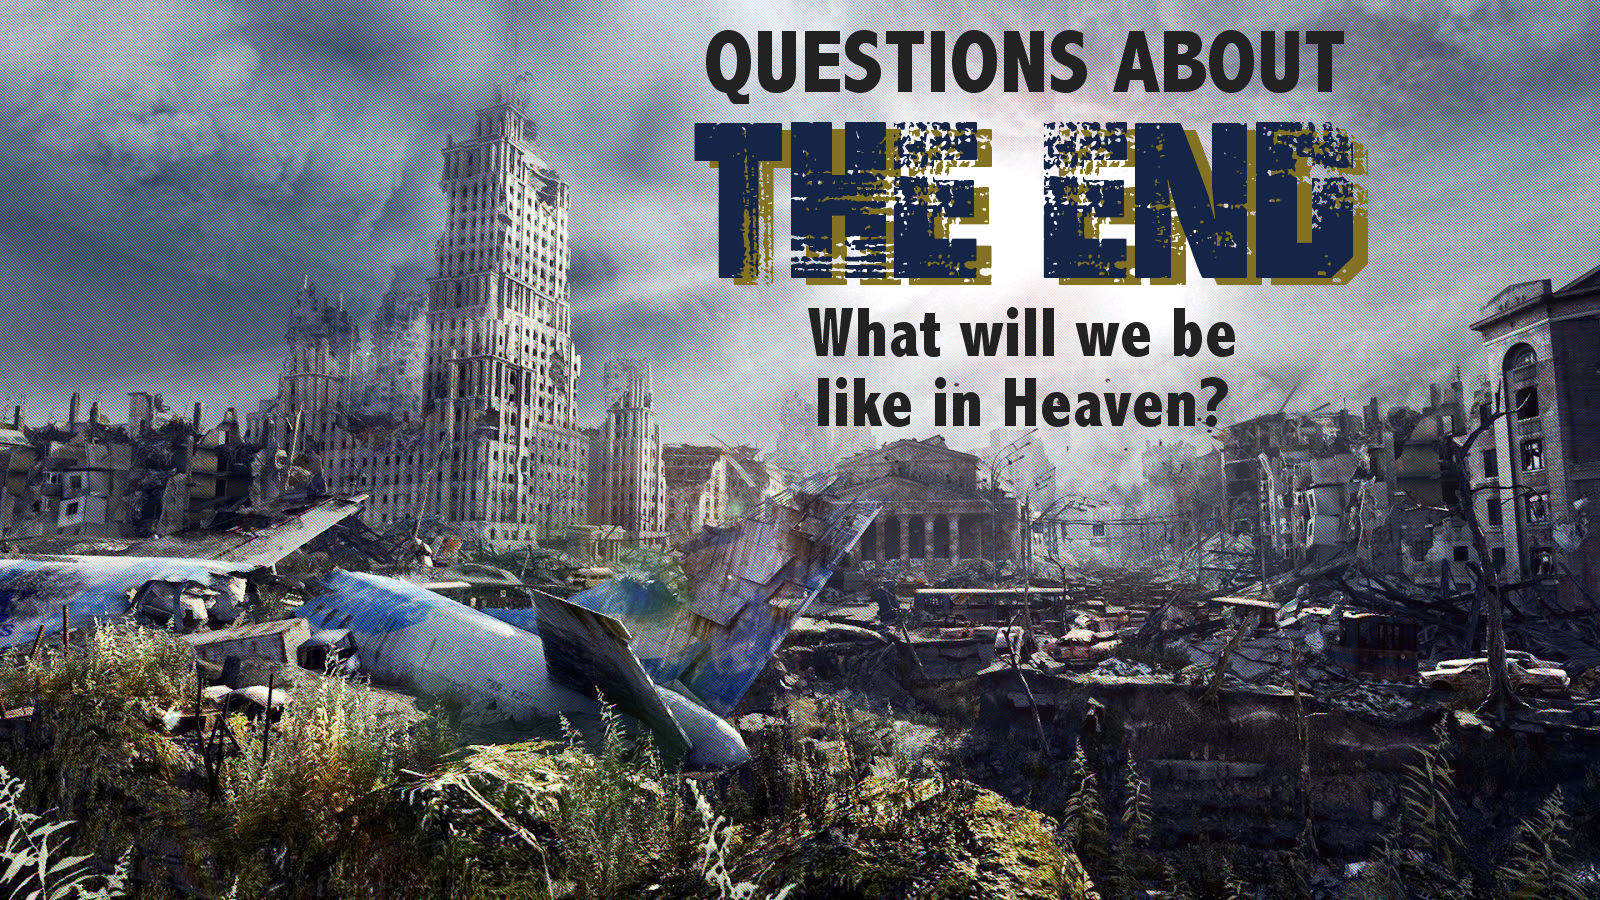 Questions about THE END - "What will we be like in Heaven?"